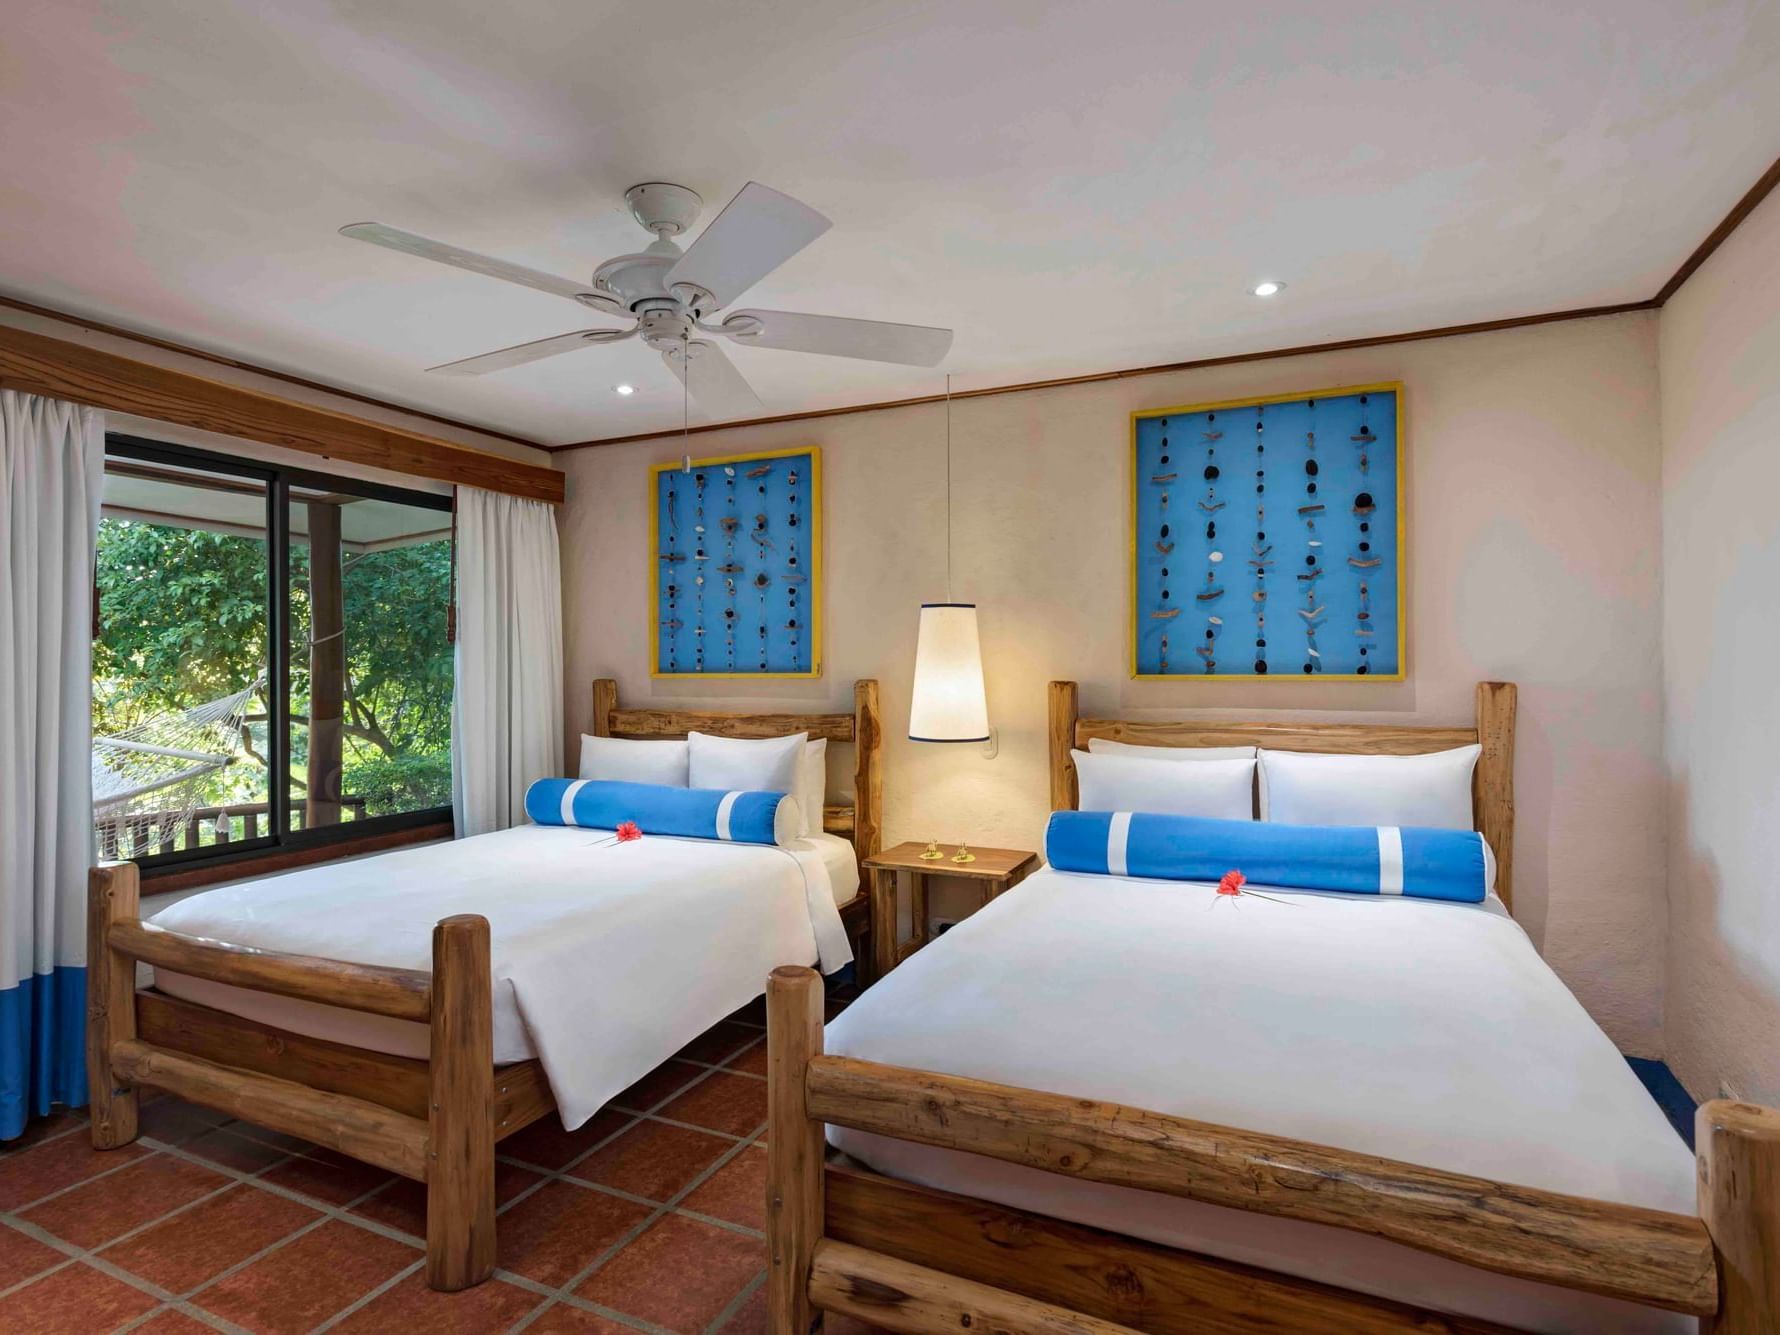 Interior of the Standard Double Room at Punta Islita Hotel